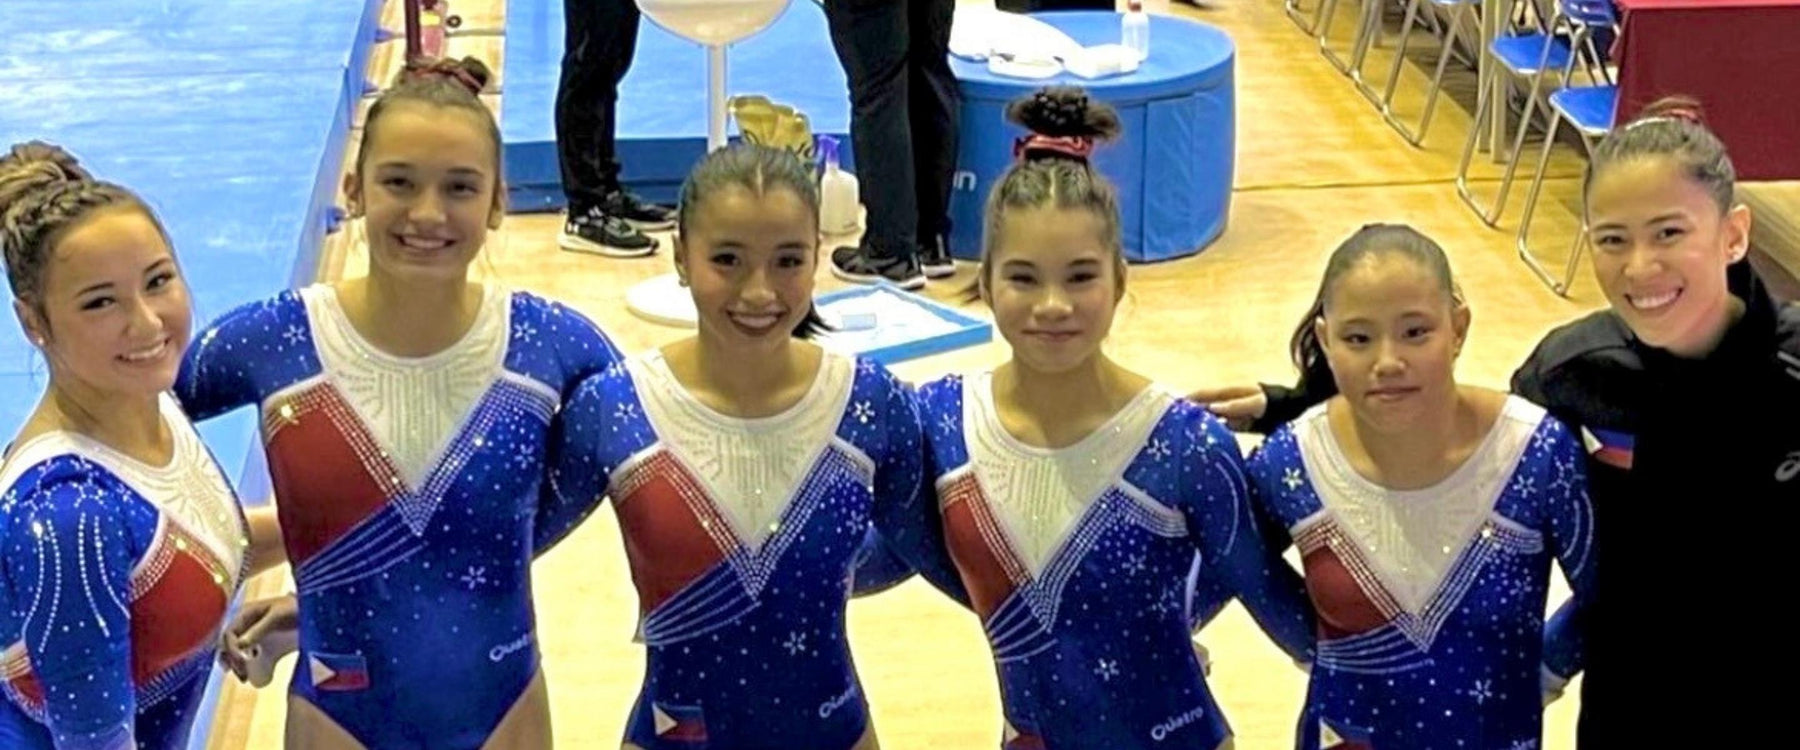 Philippines National Women’s Gymnastics Team Wins Gold at the SEA Games!